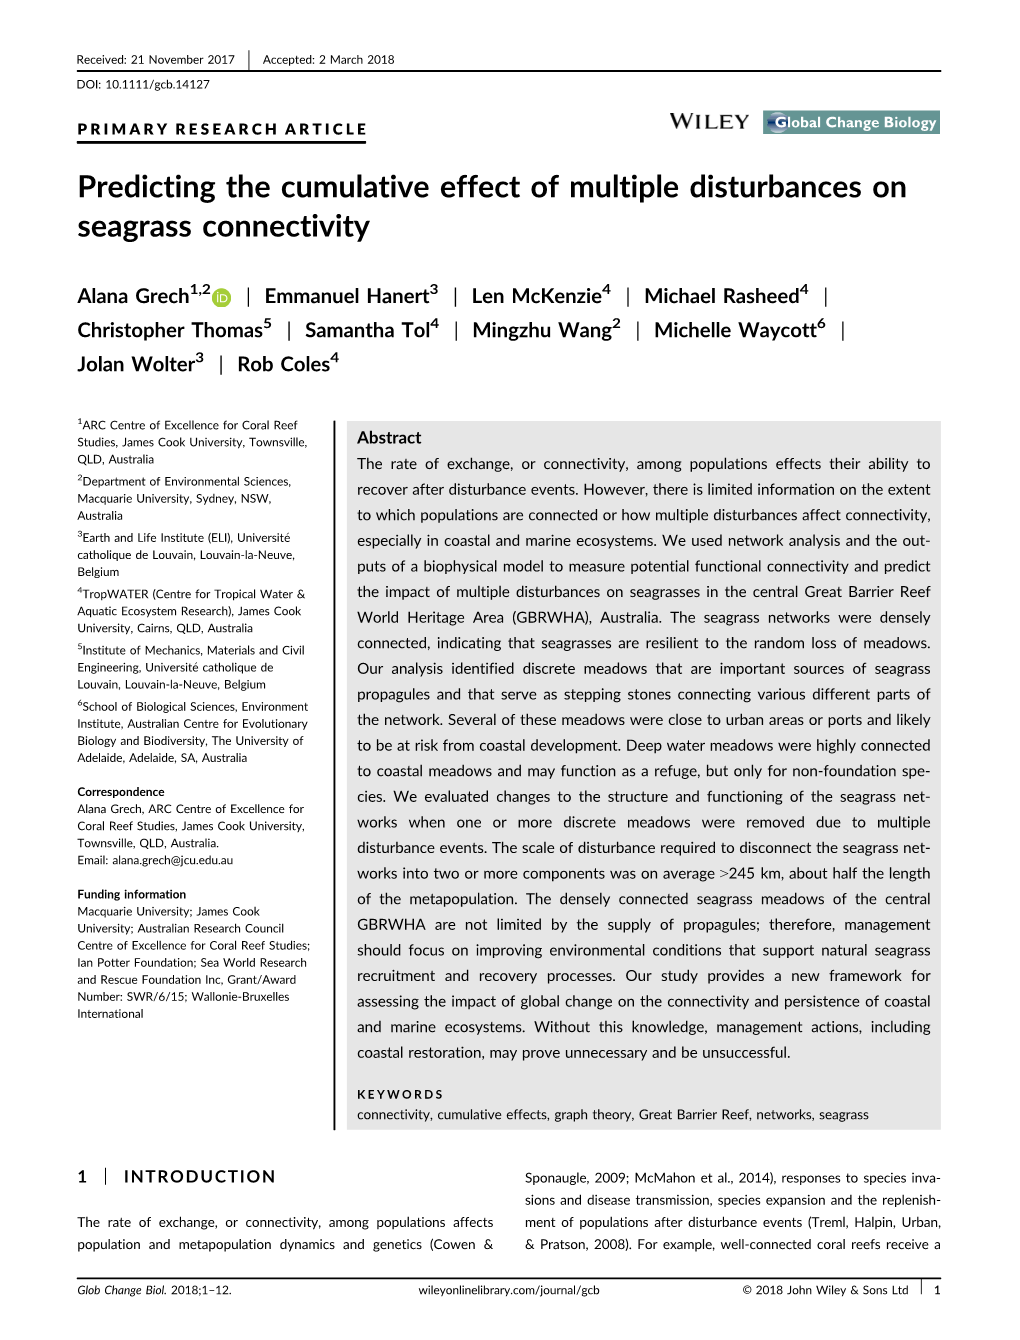 Predicting the Cumulative Effect of Multiple Disturbances on Seagrass Connectivity